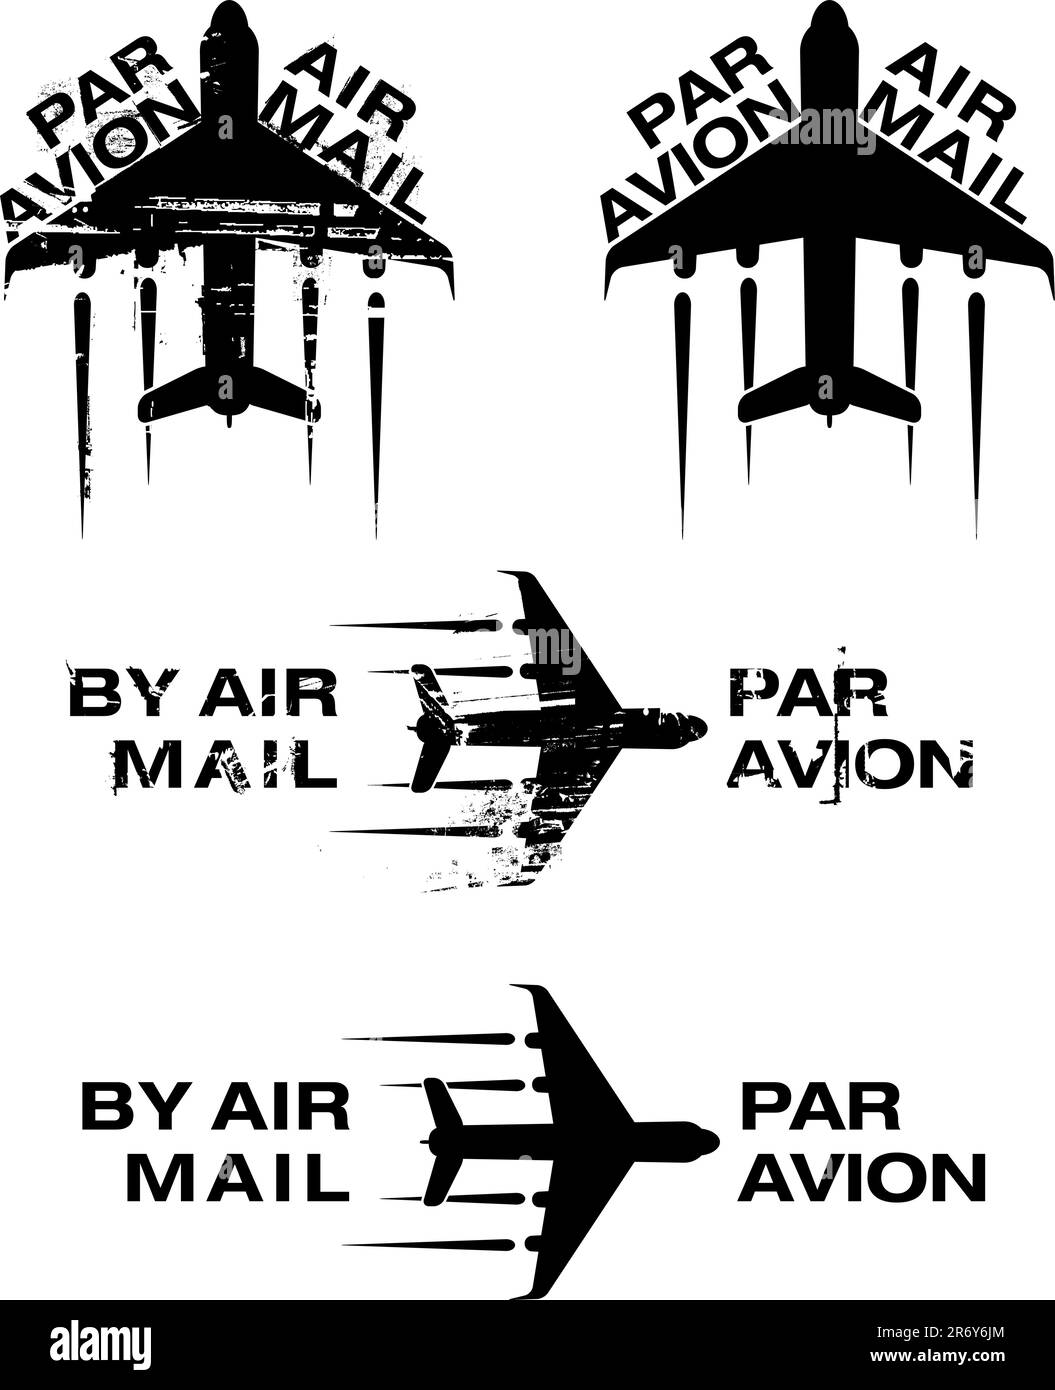 Par Avion or air mail rubber stamps. Grunge and clean vector illustration. Stock Vector